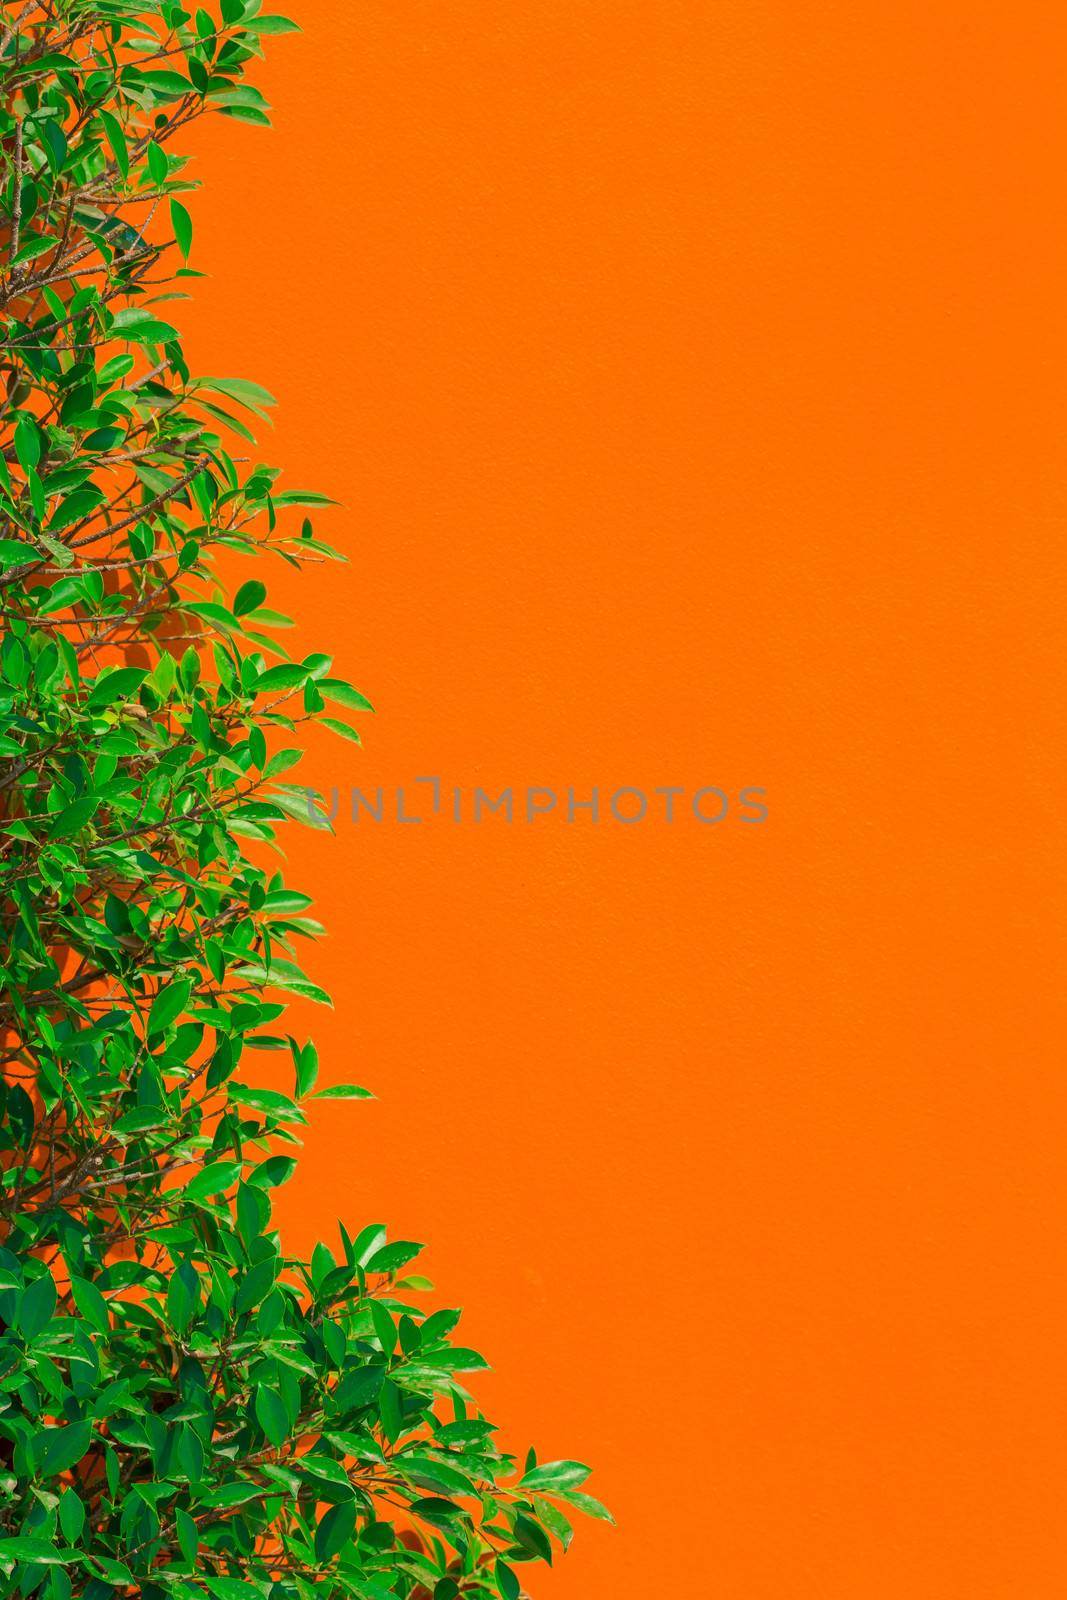 Green leaf and orange color wall background